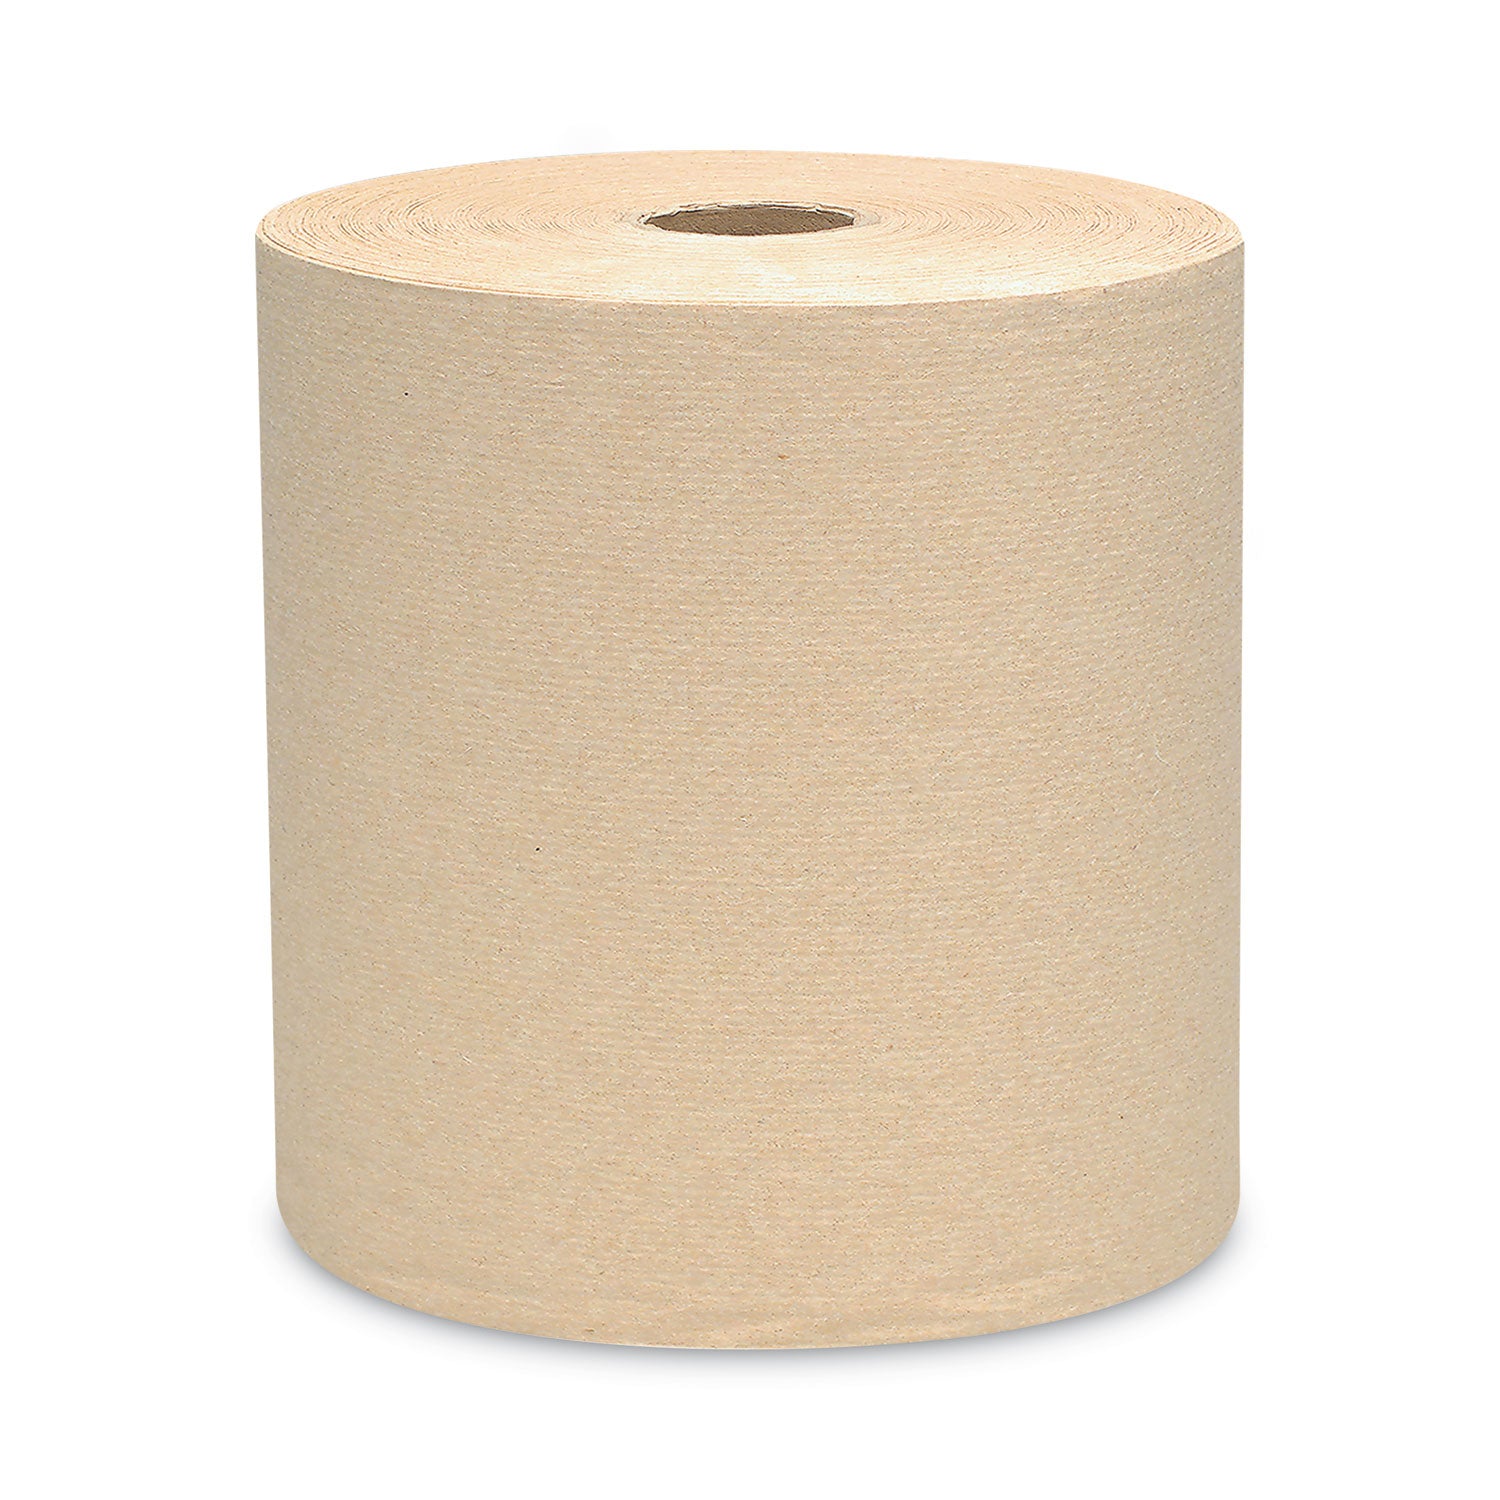 Essential Hard Roll Towels for Business, 1-Ply, 8" x 800 ft, 1.5" Core, Natural, 12 Rolls/Carton - 1